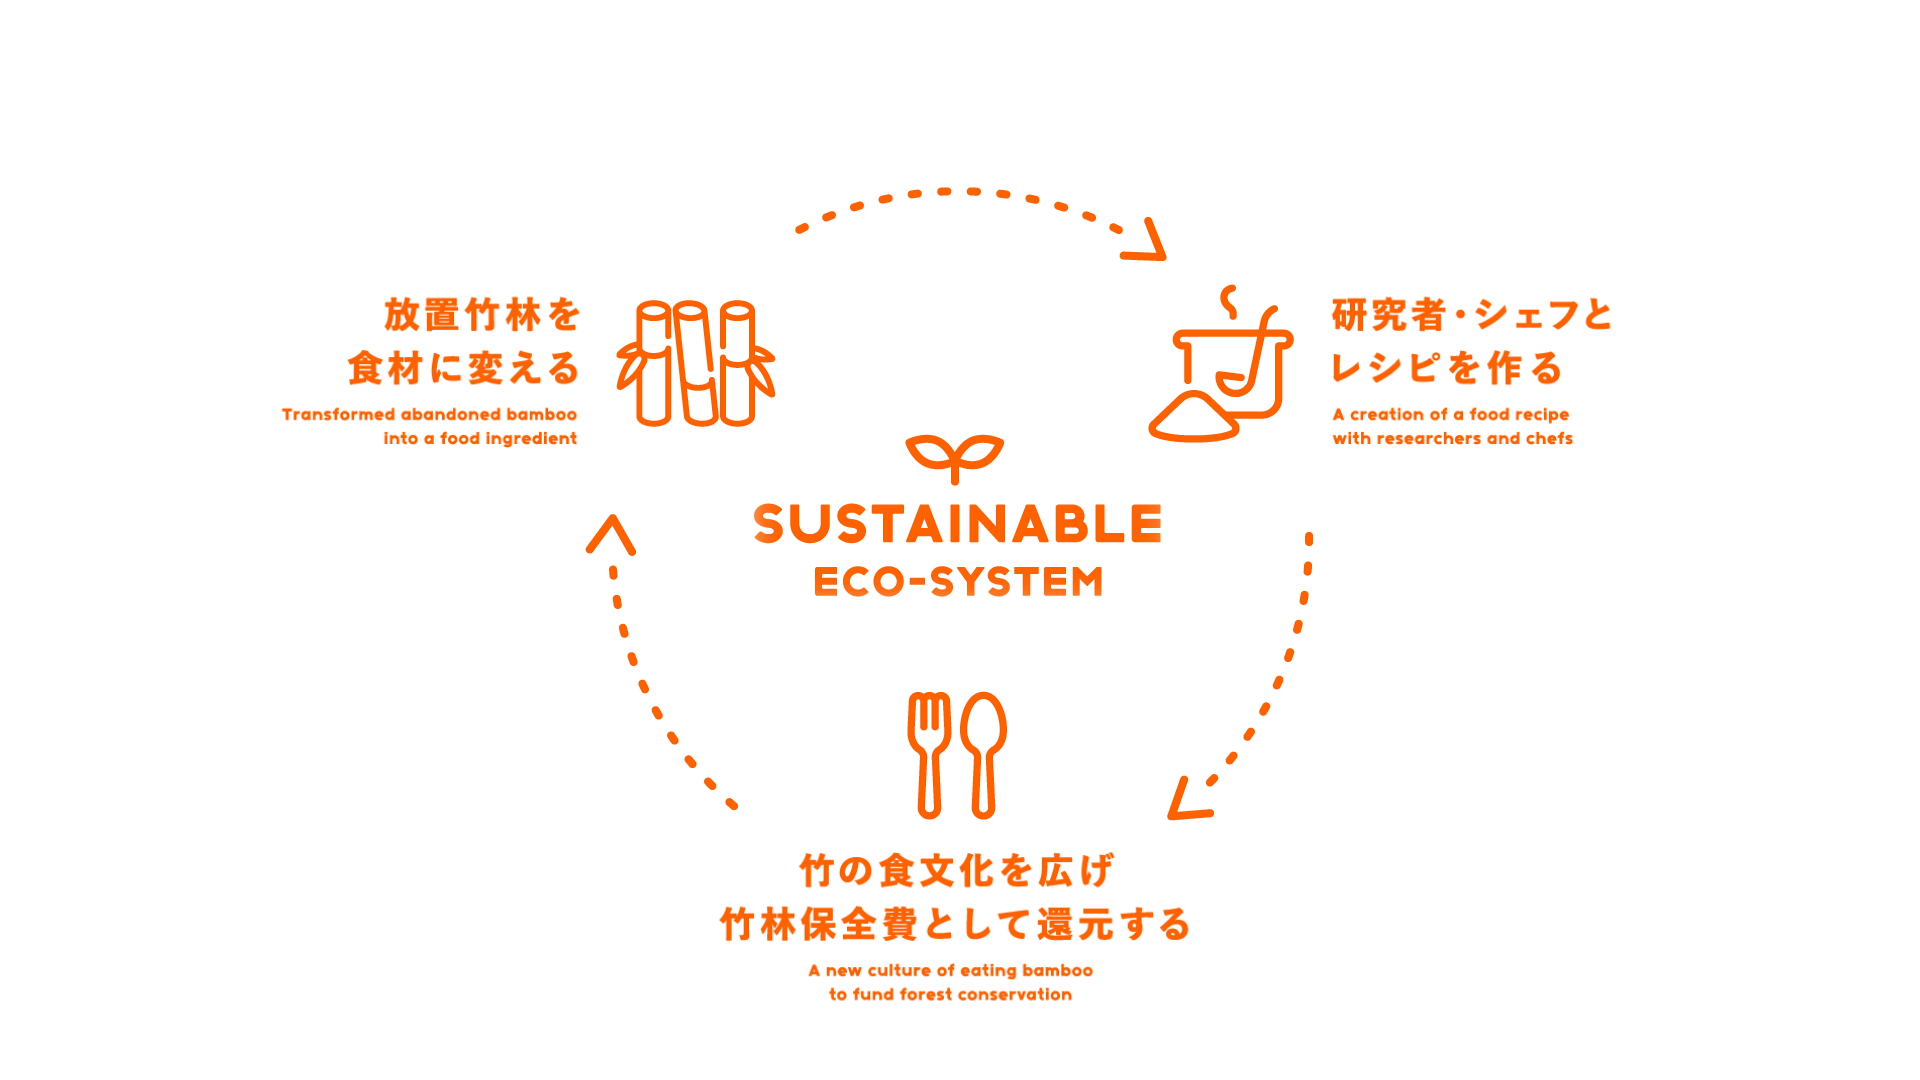 SUSTAINABLE ECO-SYSTEM